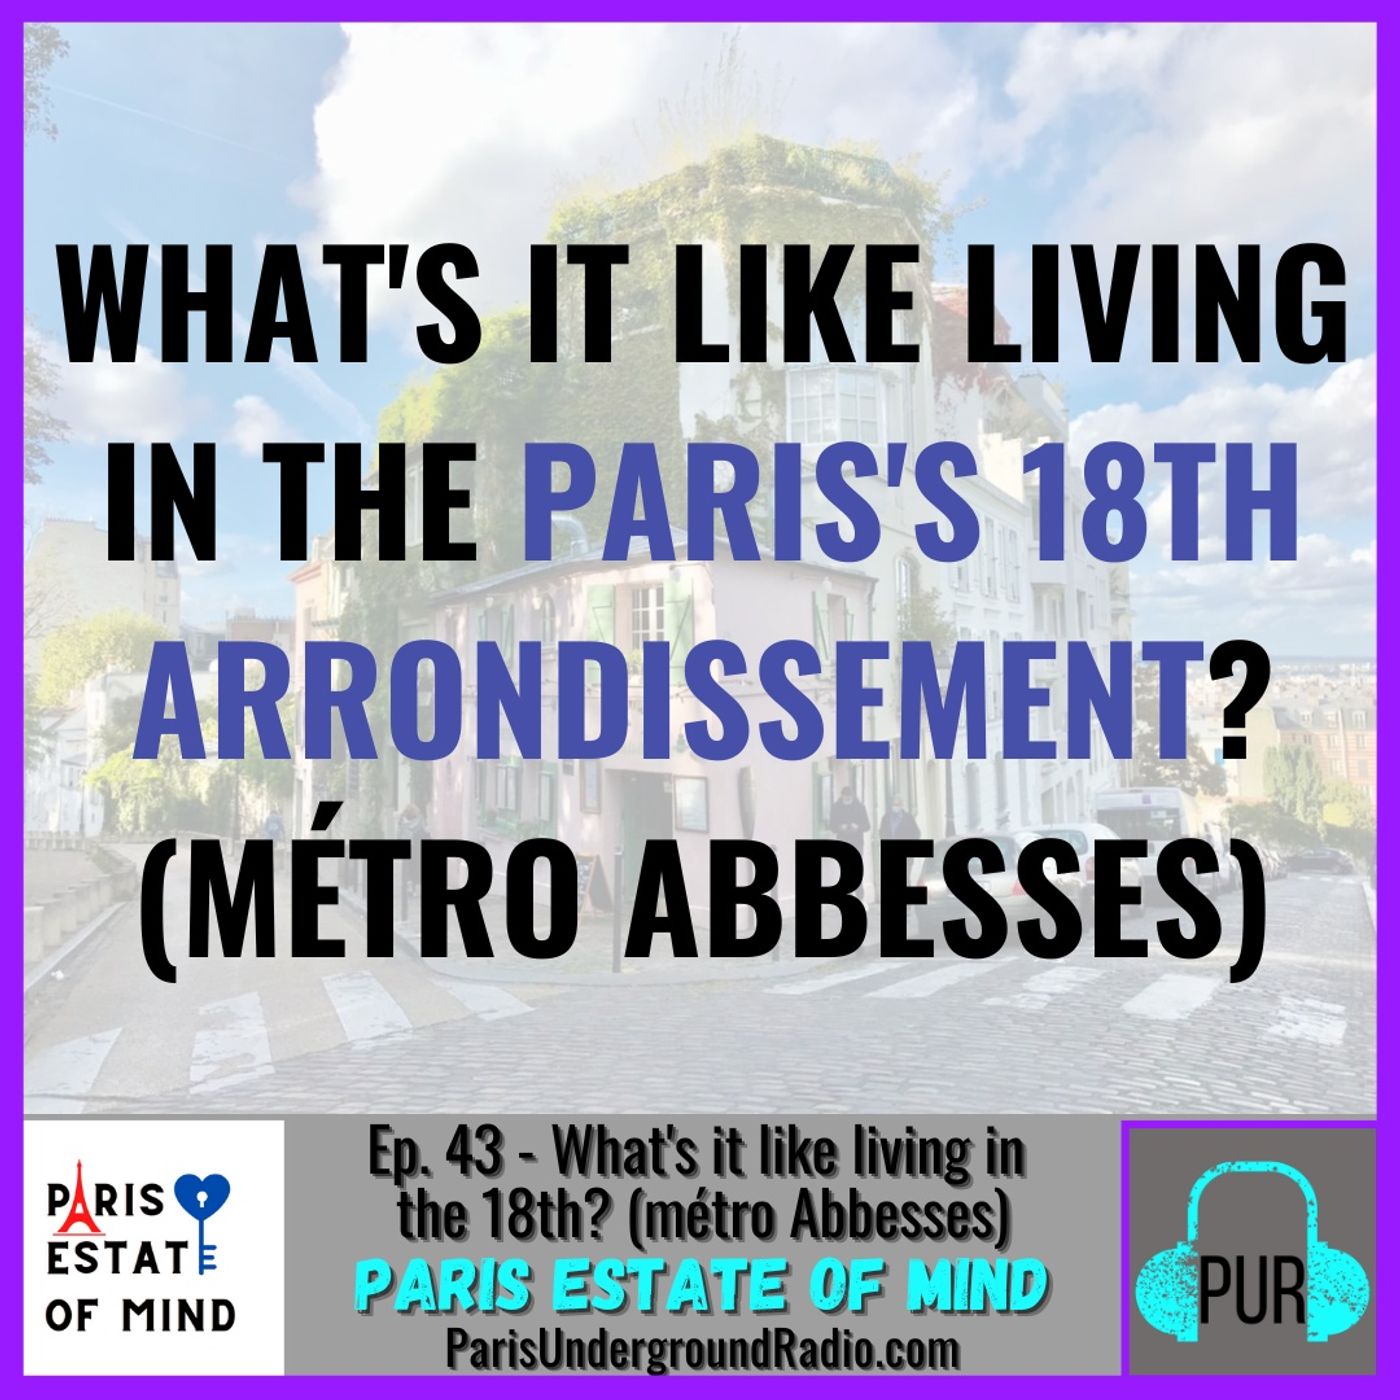 What's it like living in the 18th (métro Abbesses)